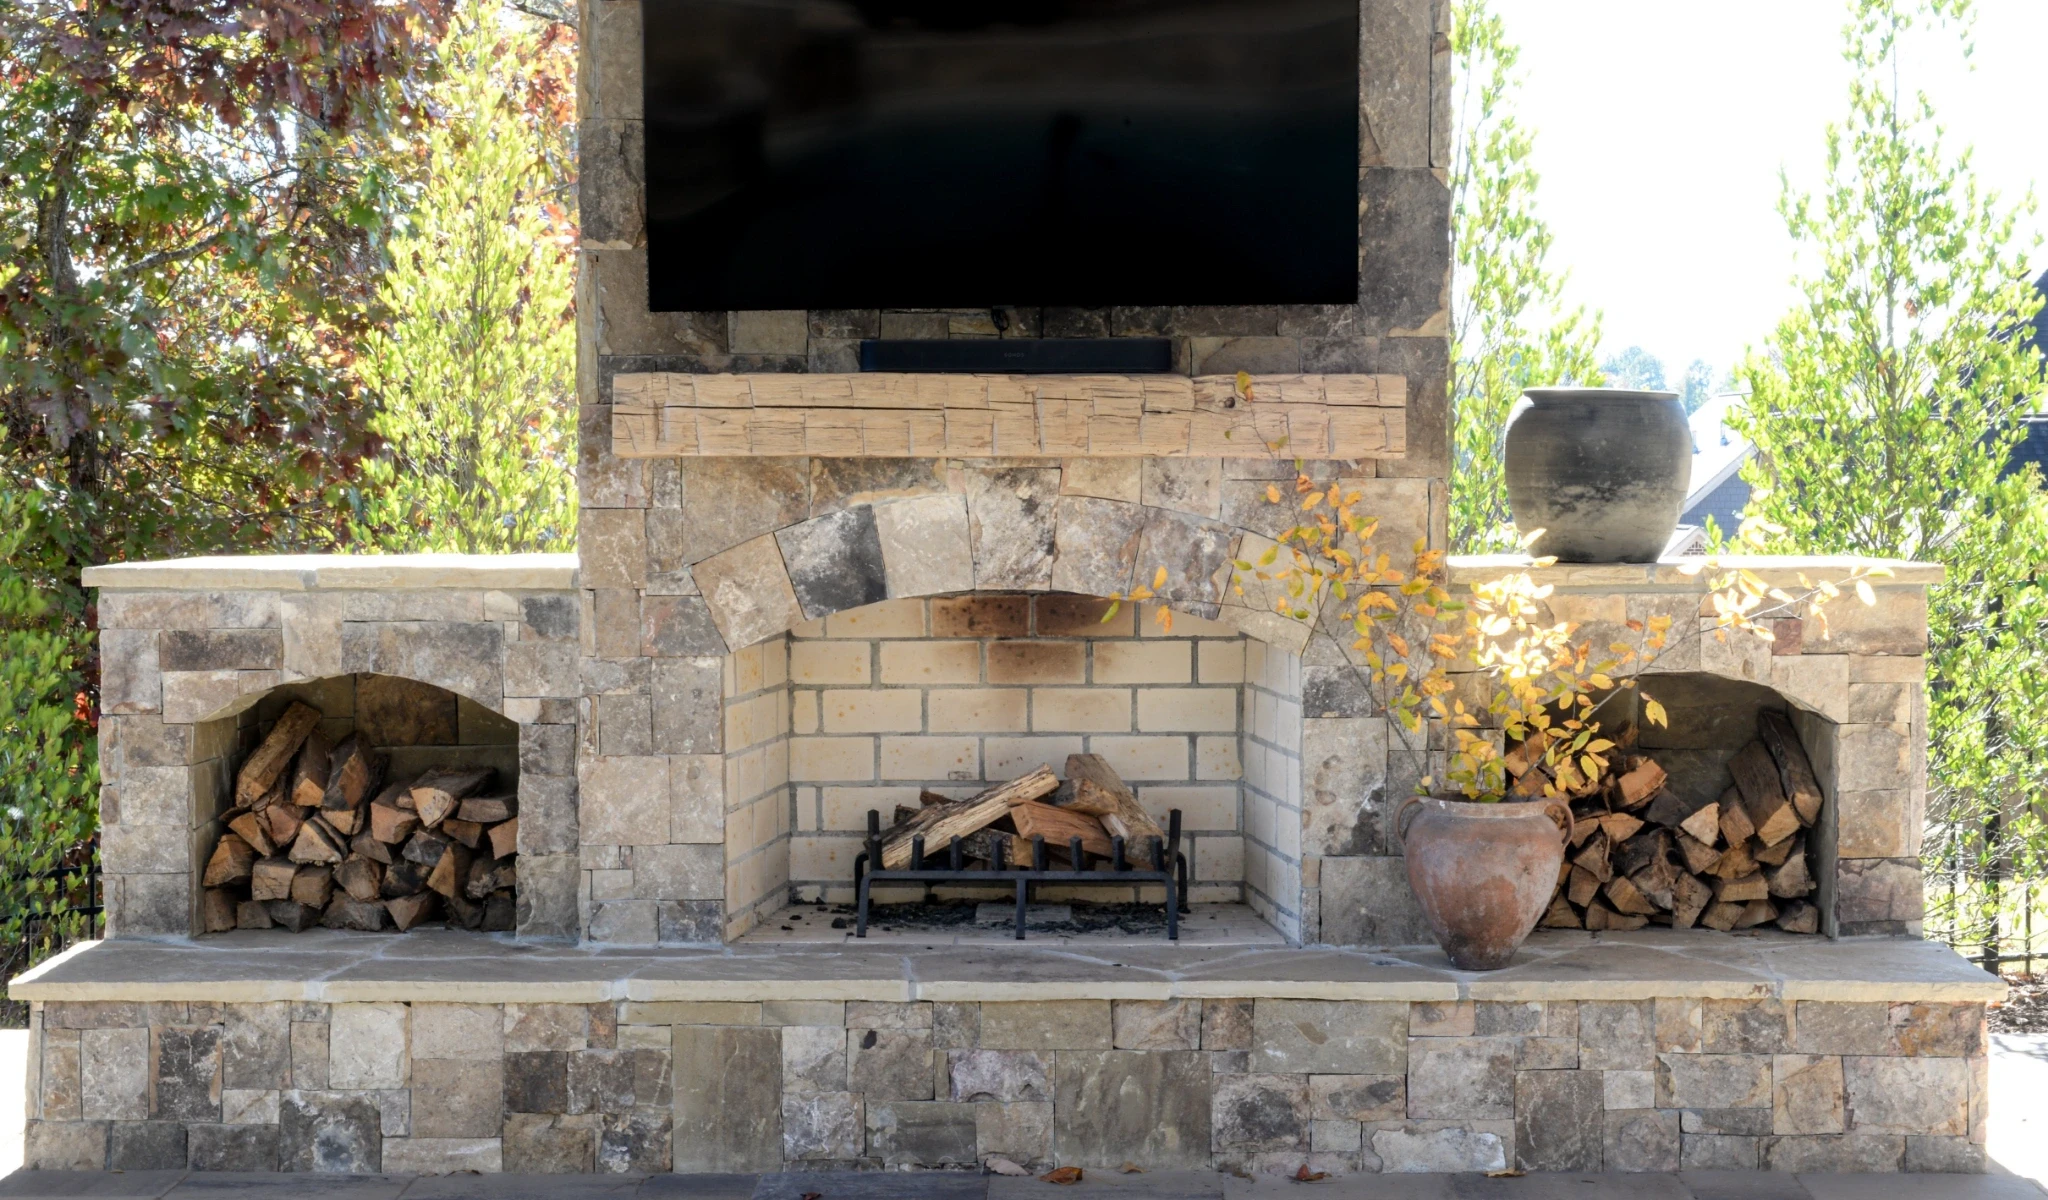 A stone fireplace with a TV mounted above it.